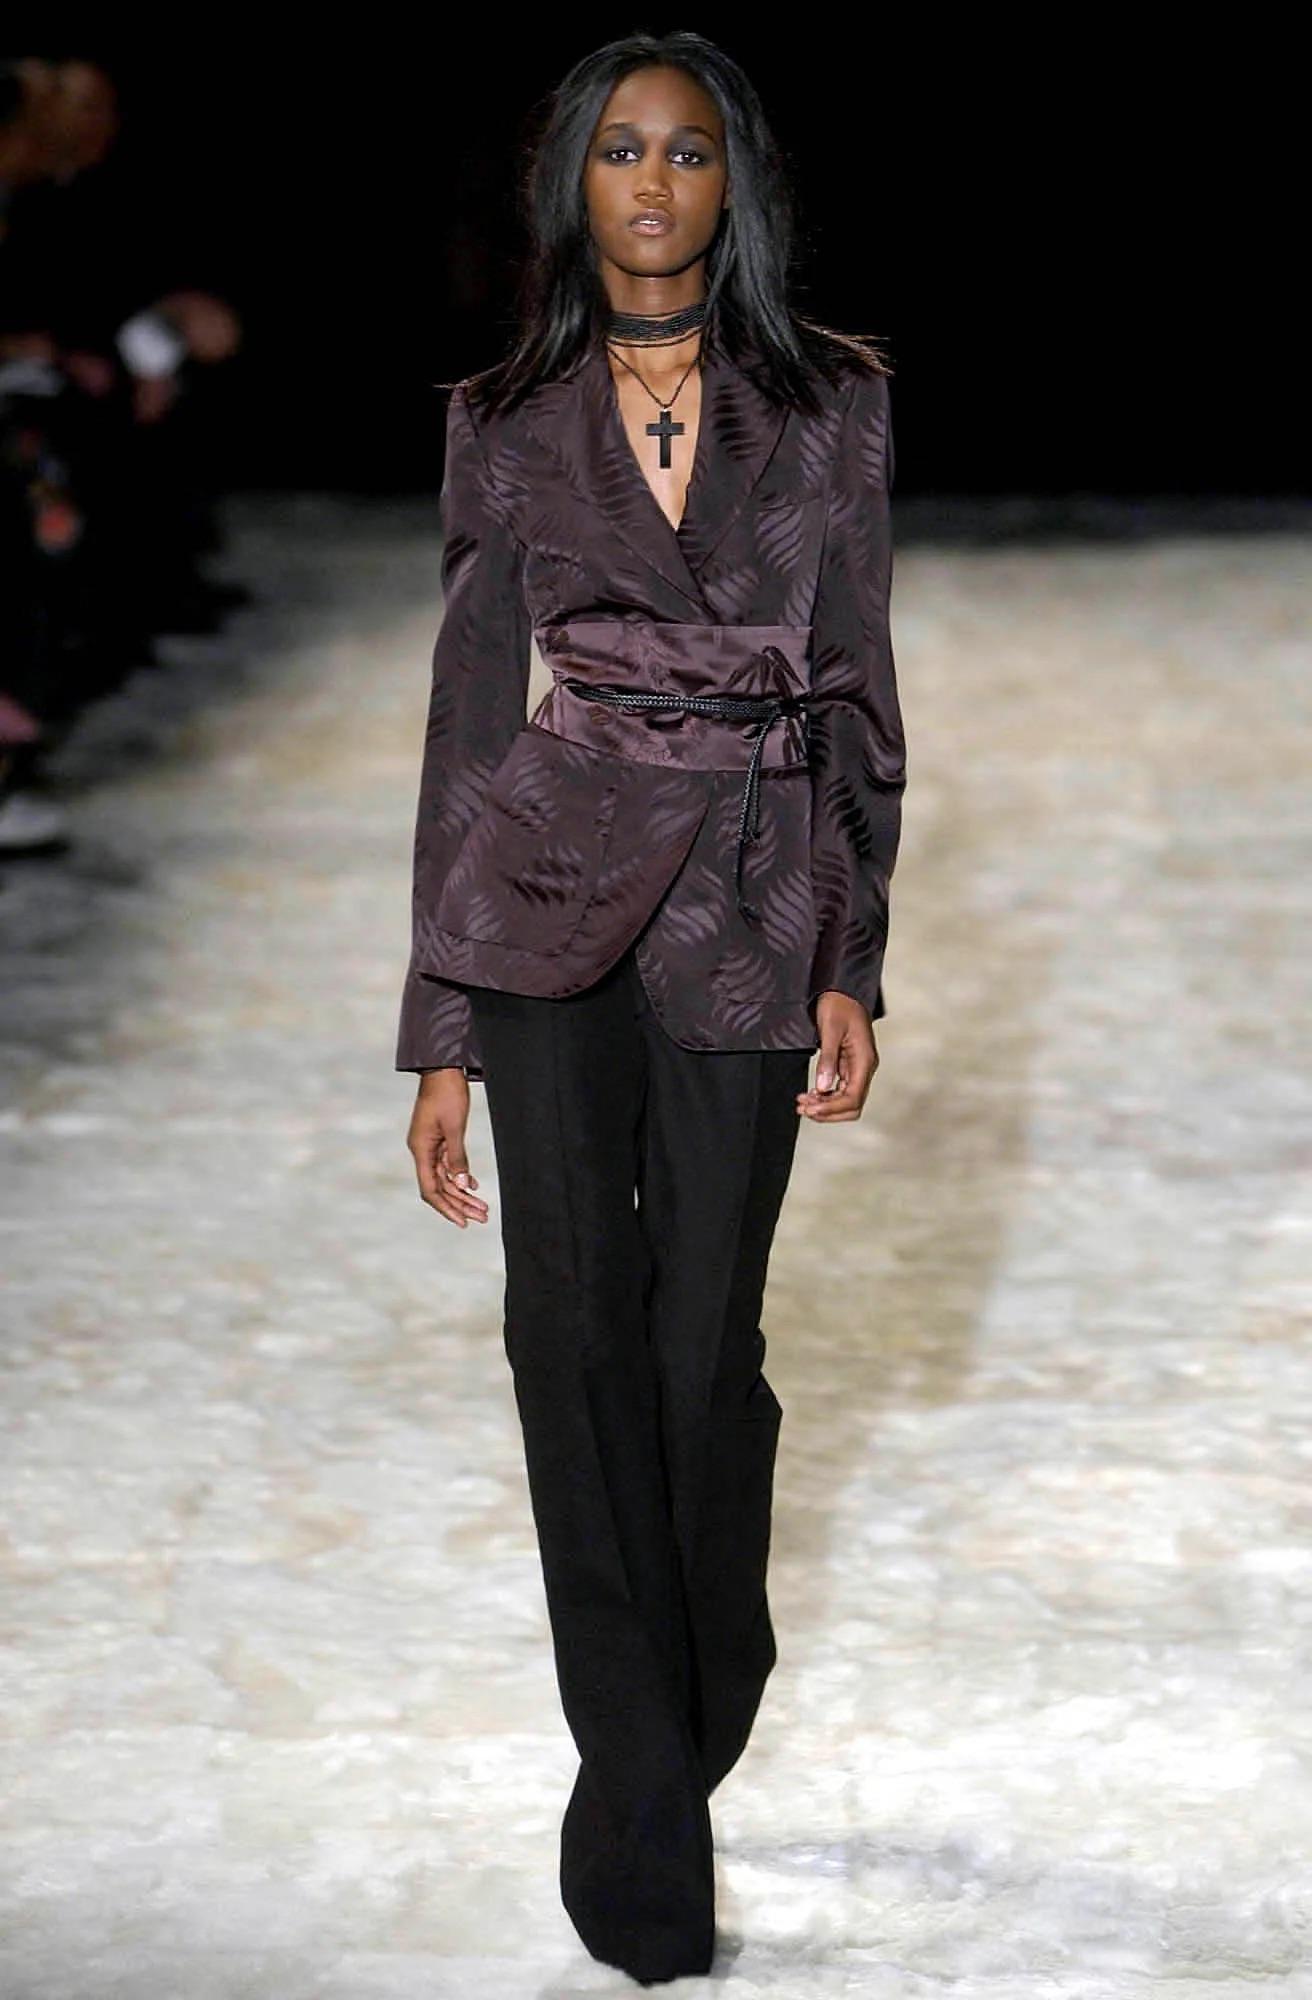 Presenting a fabulous deep purple silk Gucci blazer, designed by Tom Ford. From the Fall/Winter 2002 collection, this blazer debuted as part of look 18, modeled by Valery Prince. Constructed of lightly shiny silk with a leaf-like print, this open